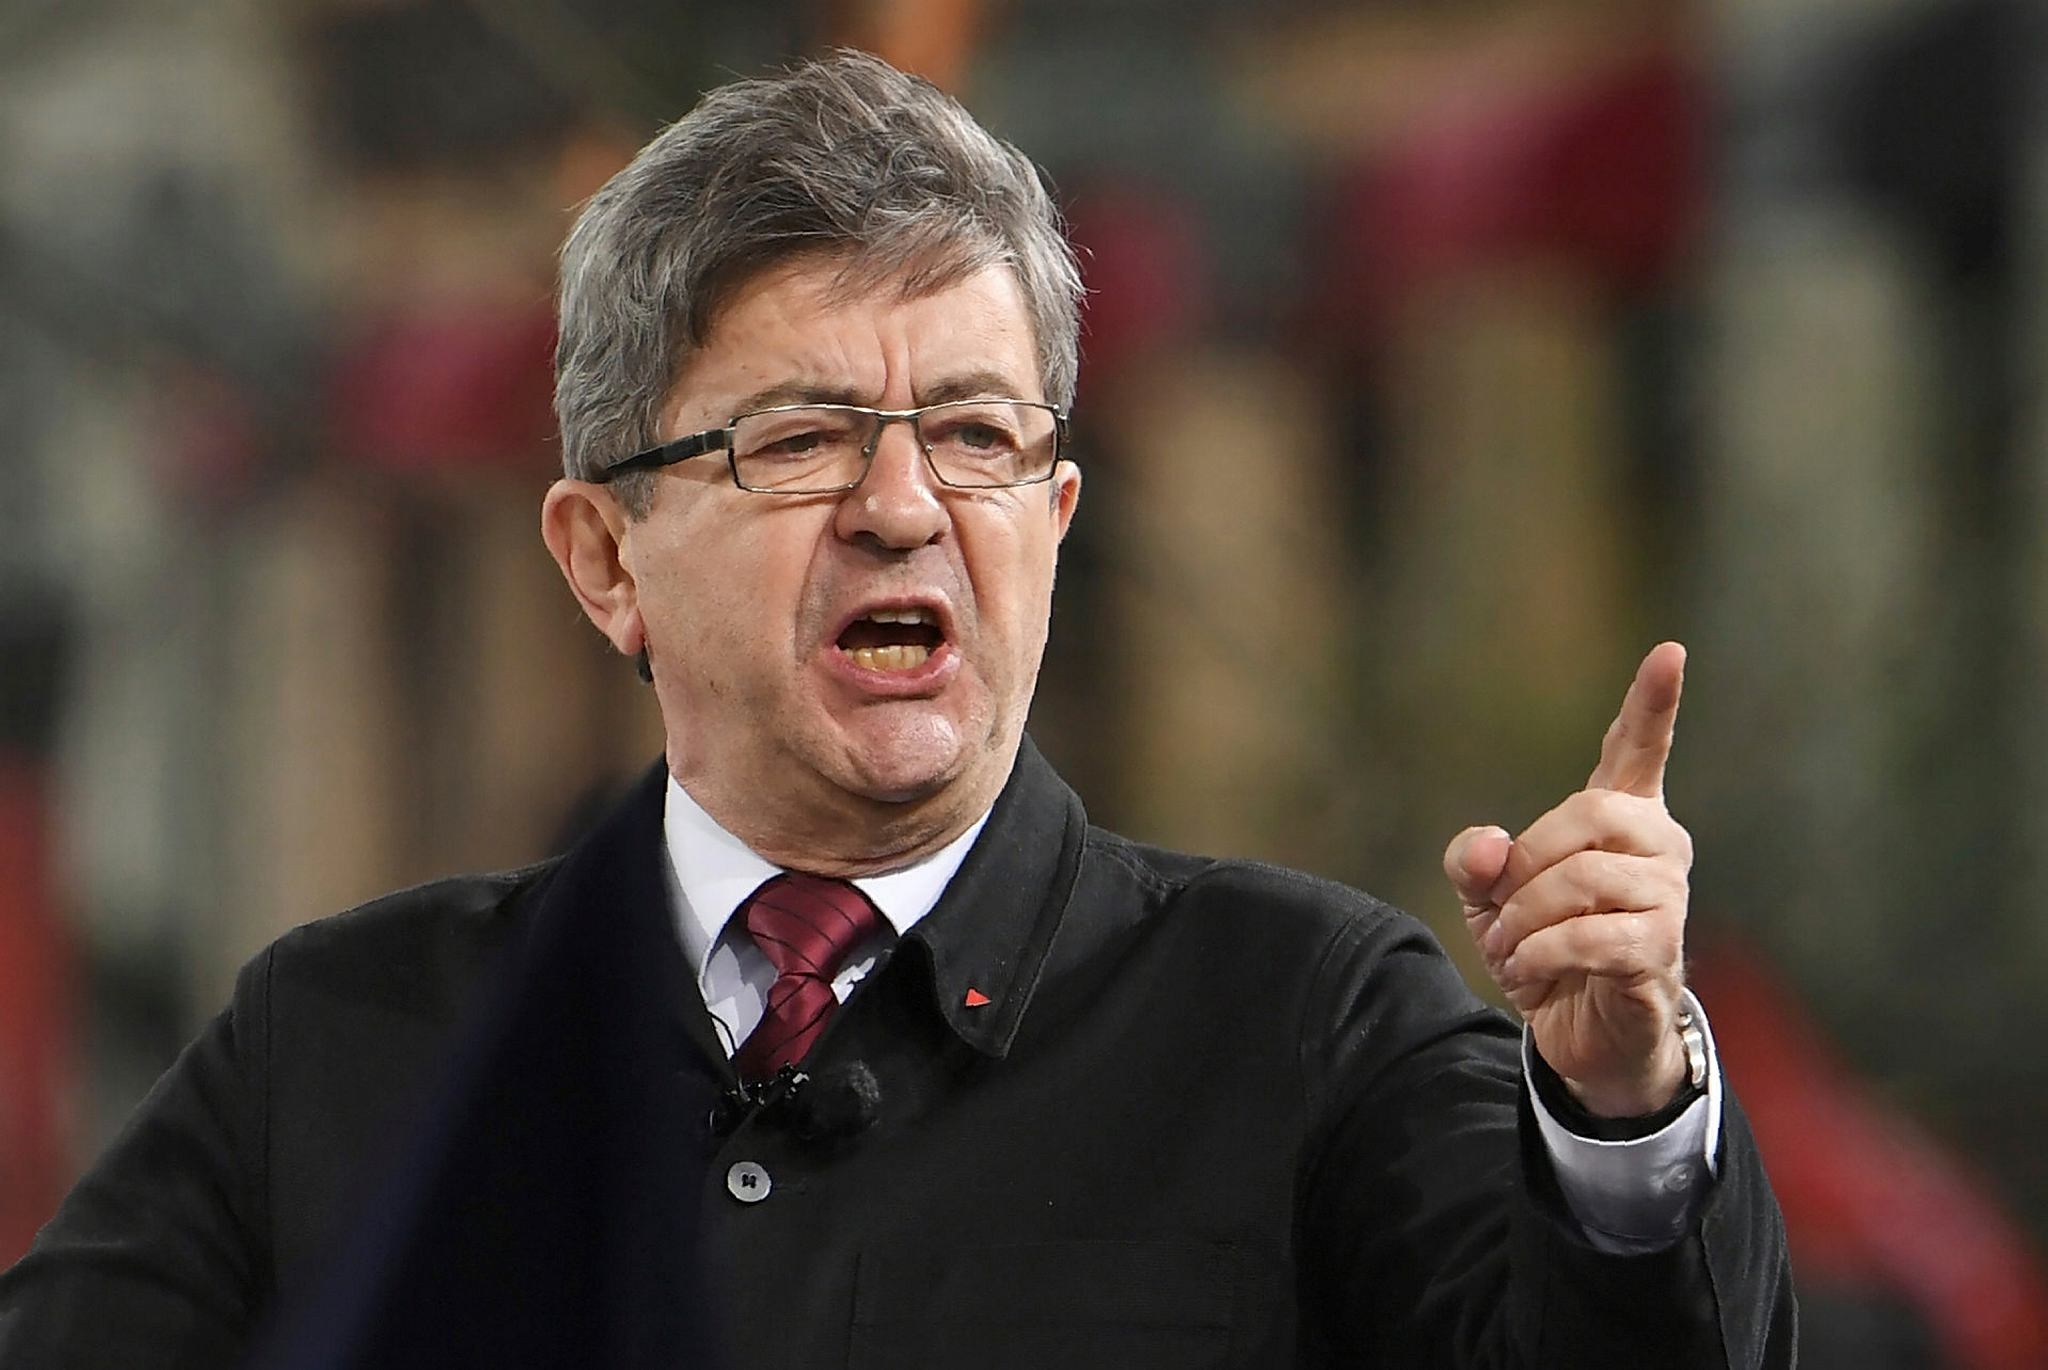 French presidential election candidate for the far-left coalition ,La France insoumise, Jean-Luc Melenchon speaks during a rally following the March for the 6th Republic on March 18, Paris.